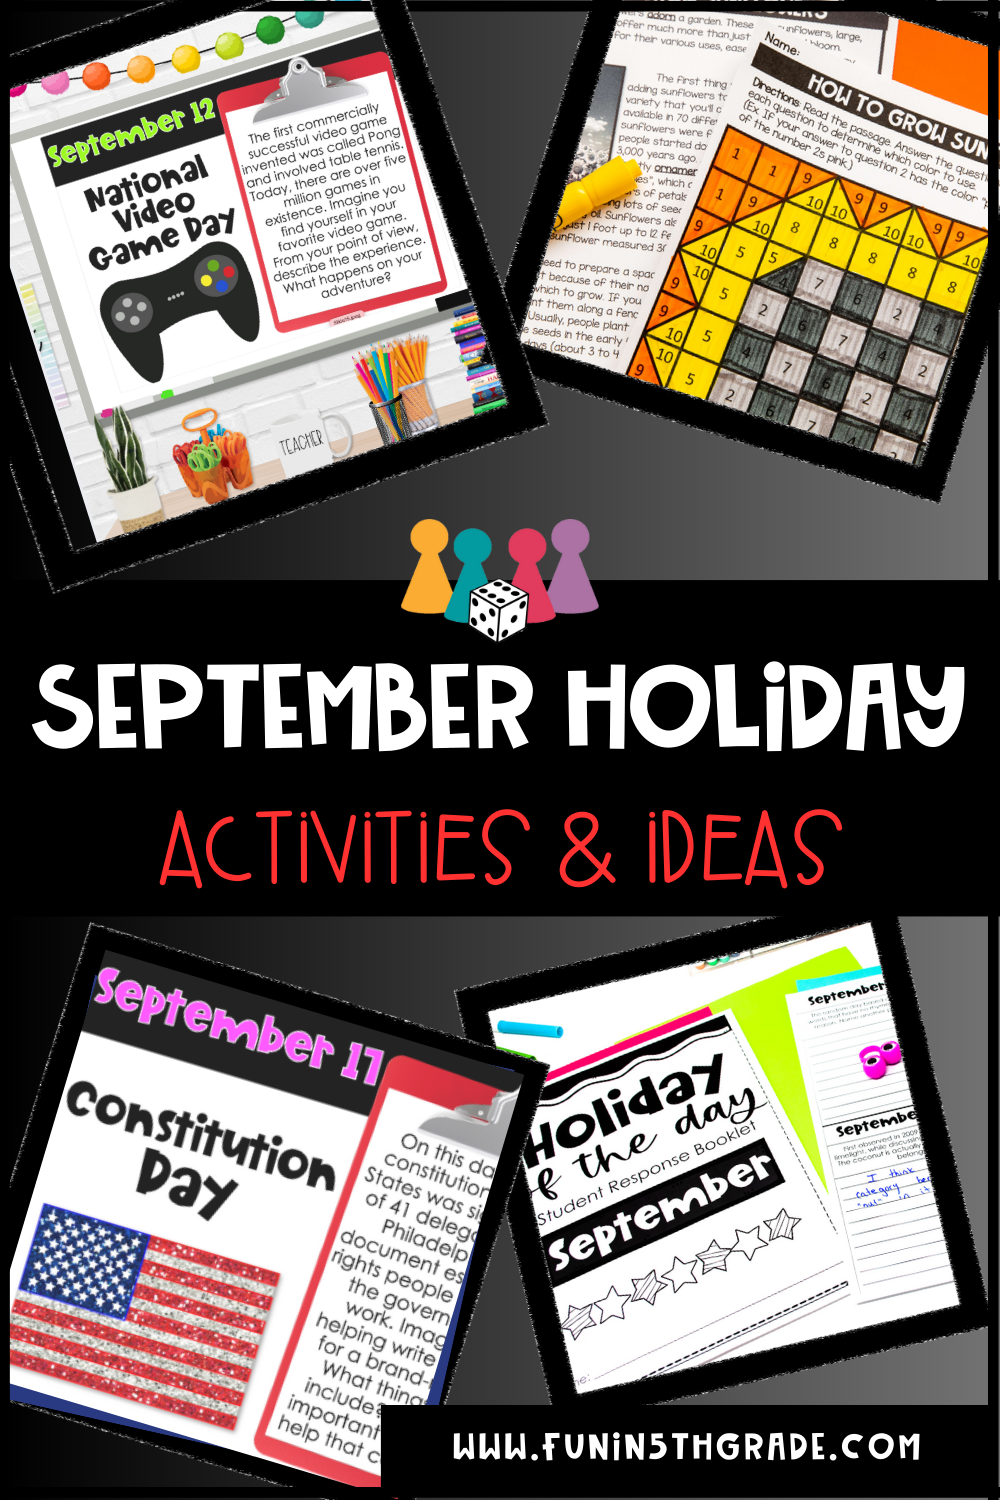 September Holiday Activities and Ideas Pinterest Image